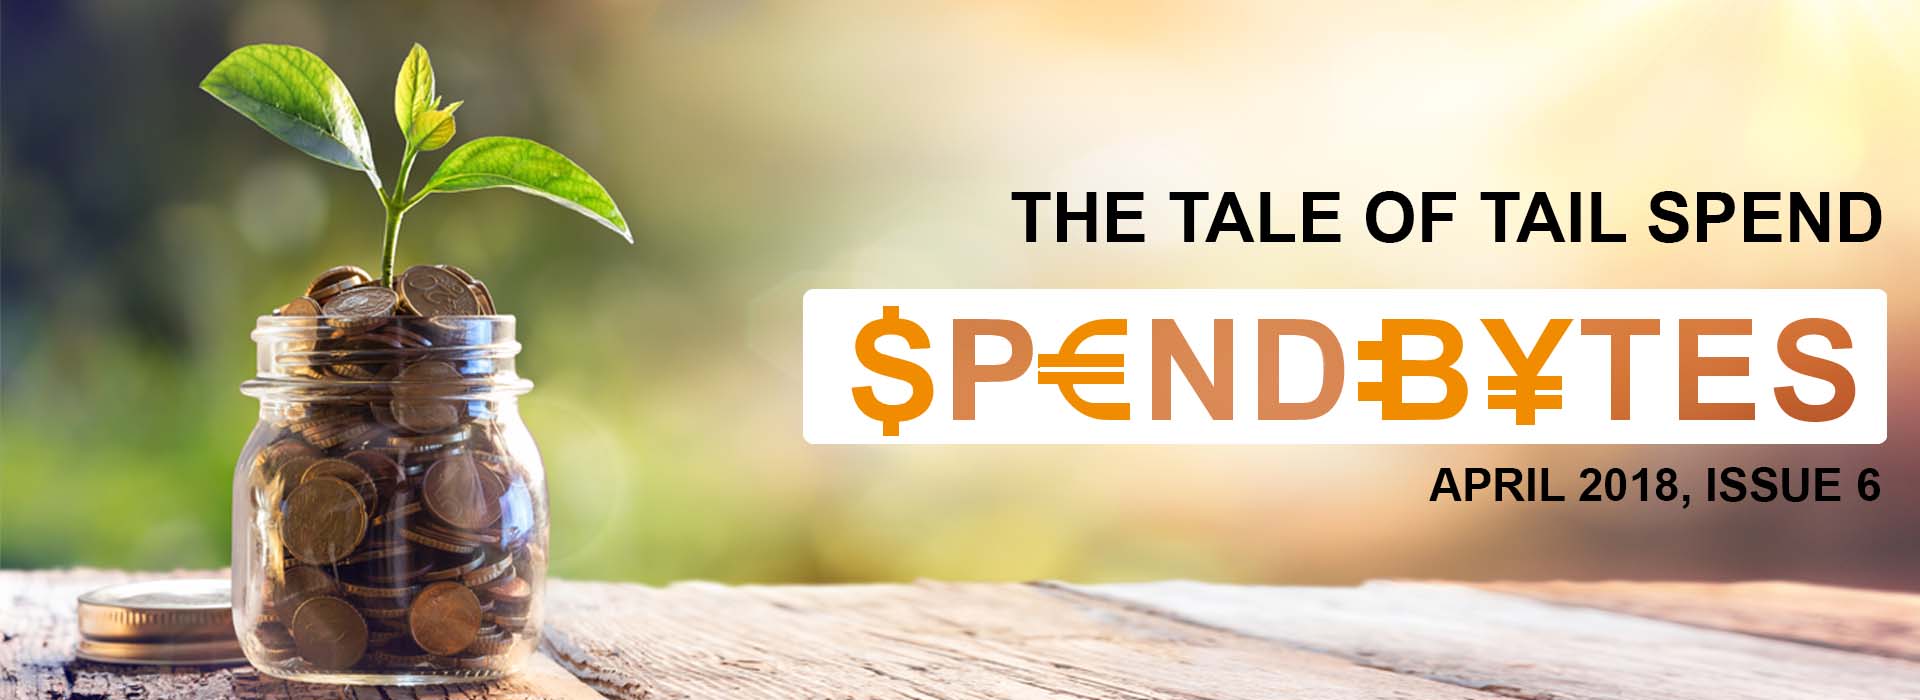 Tail Spend Management - SpendBytes Issue 06